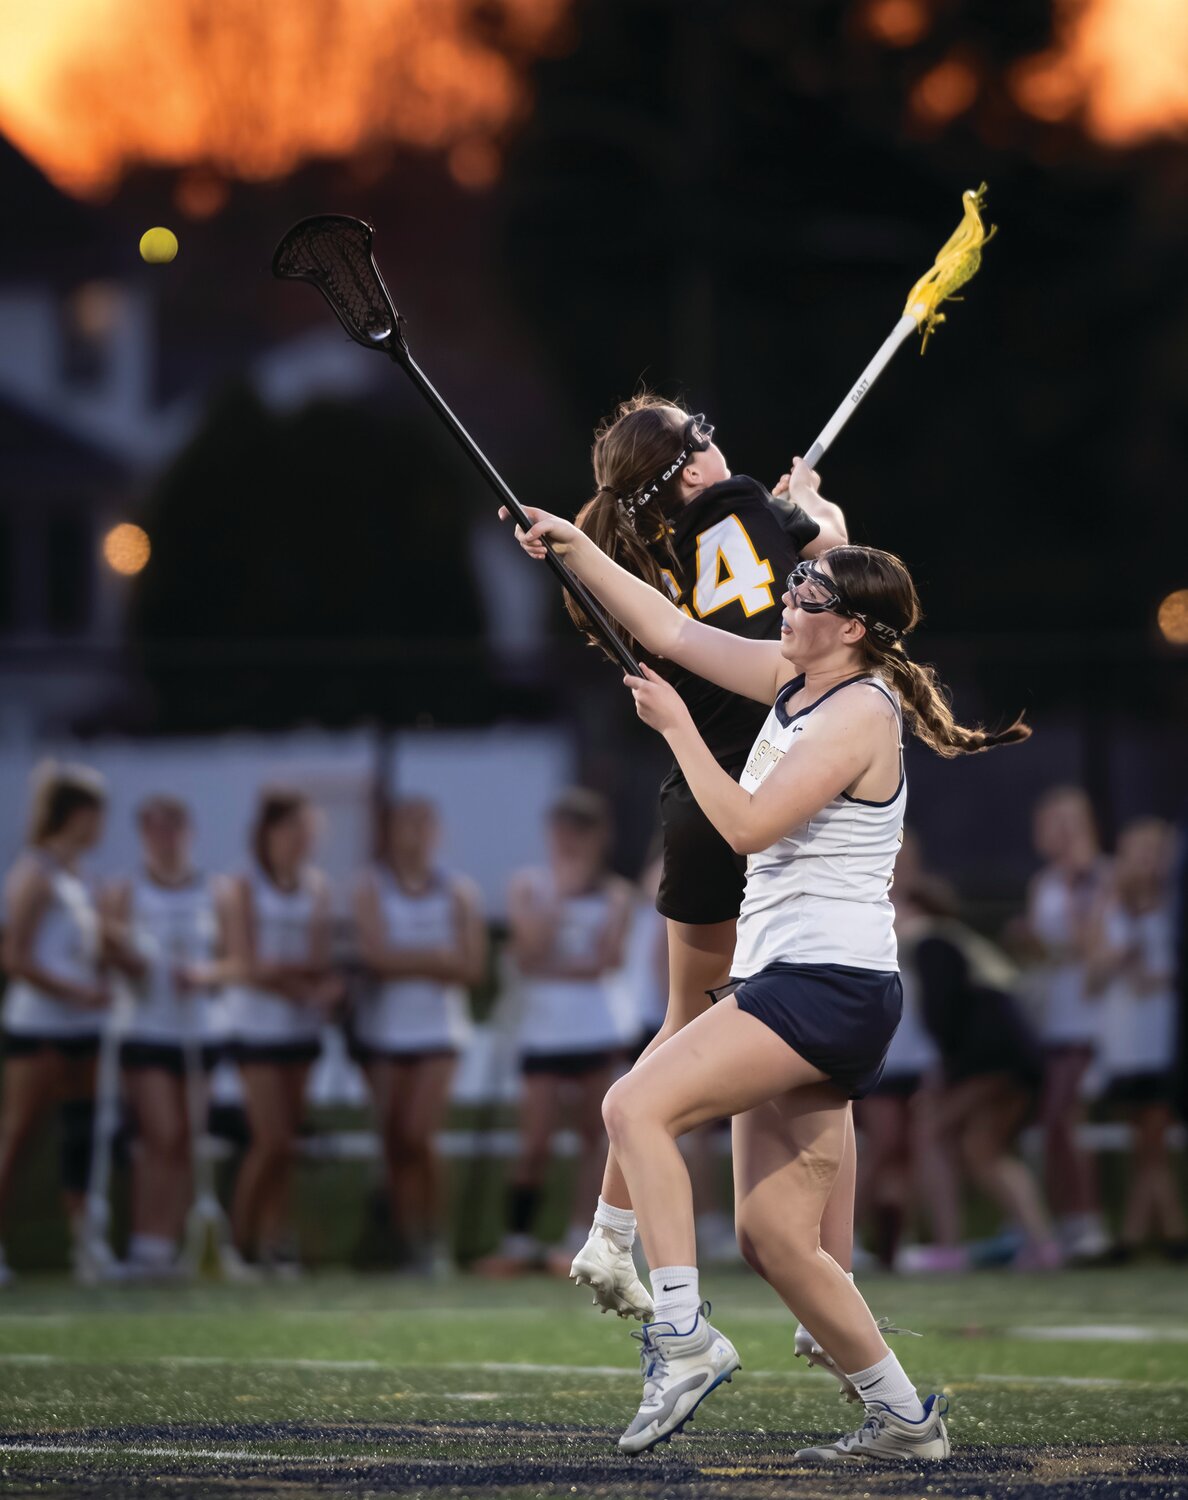 Council Rock South’s Cam Brundage wins a faceoff over Central Bucks West’s Olivia Barrett during the third quarter.